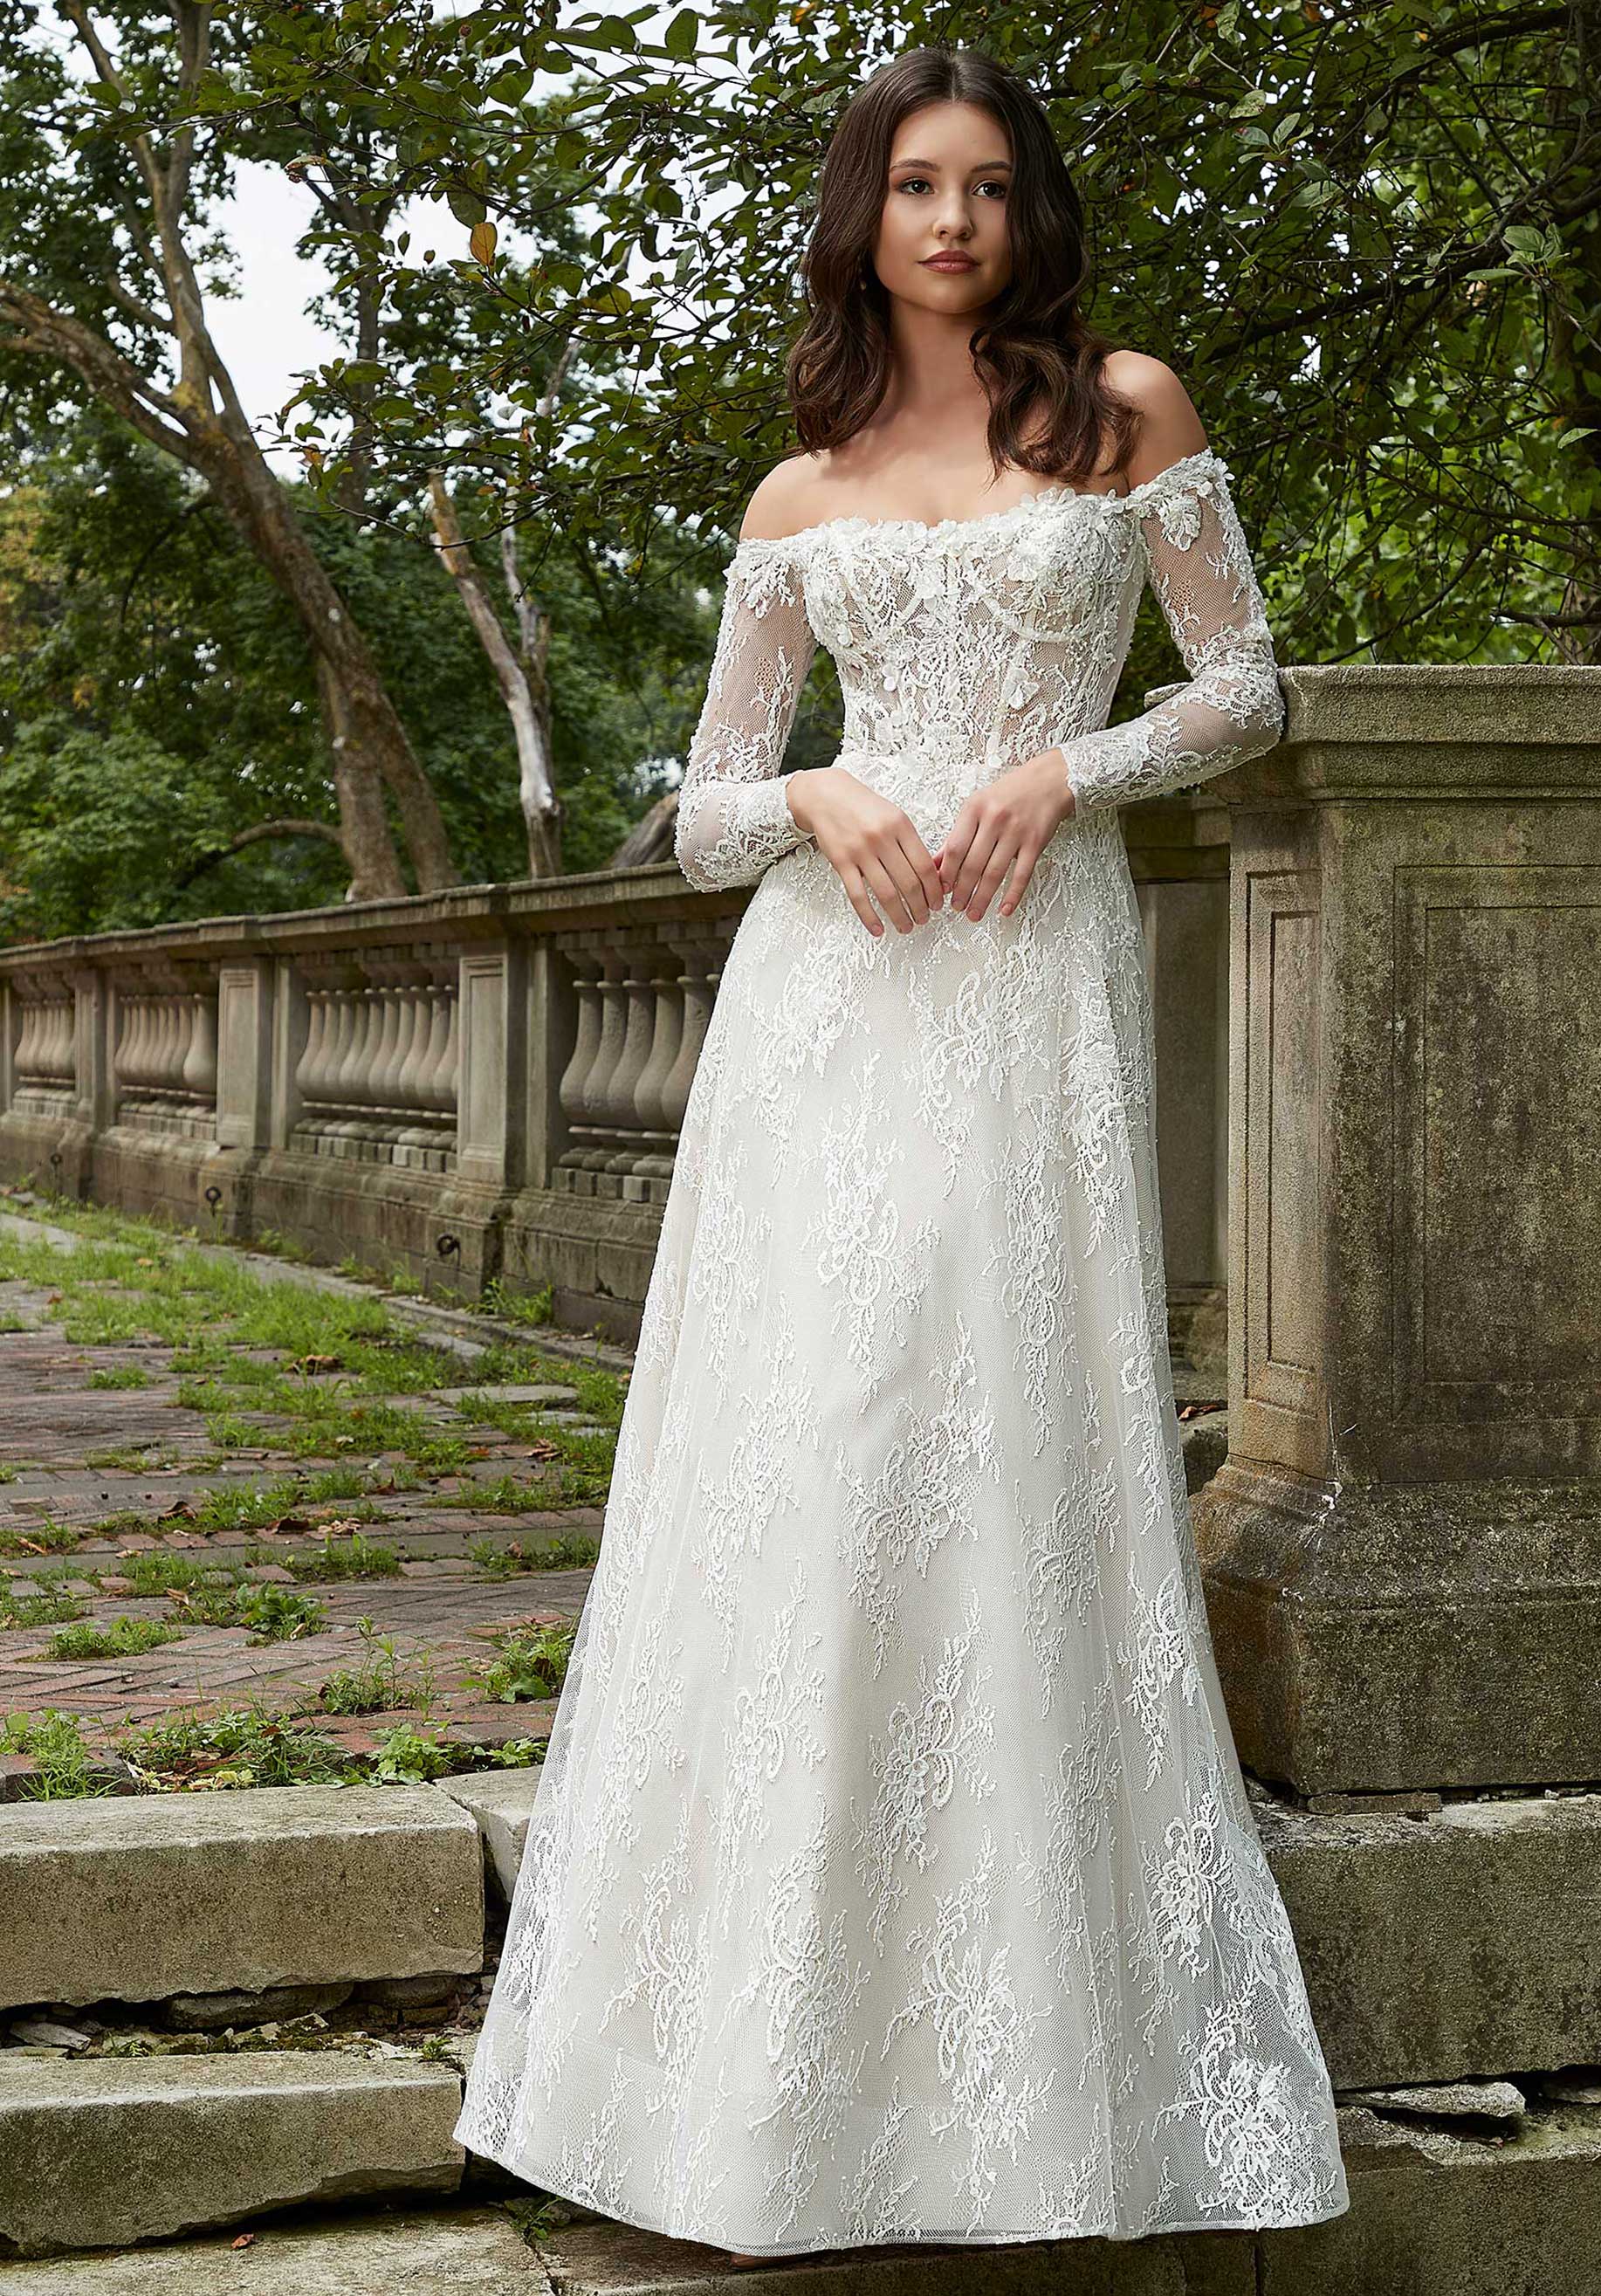 Luxurious lace wedding dress with the finest Italian mesh